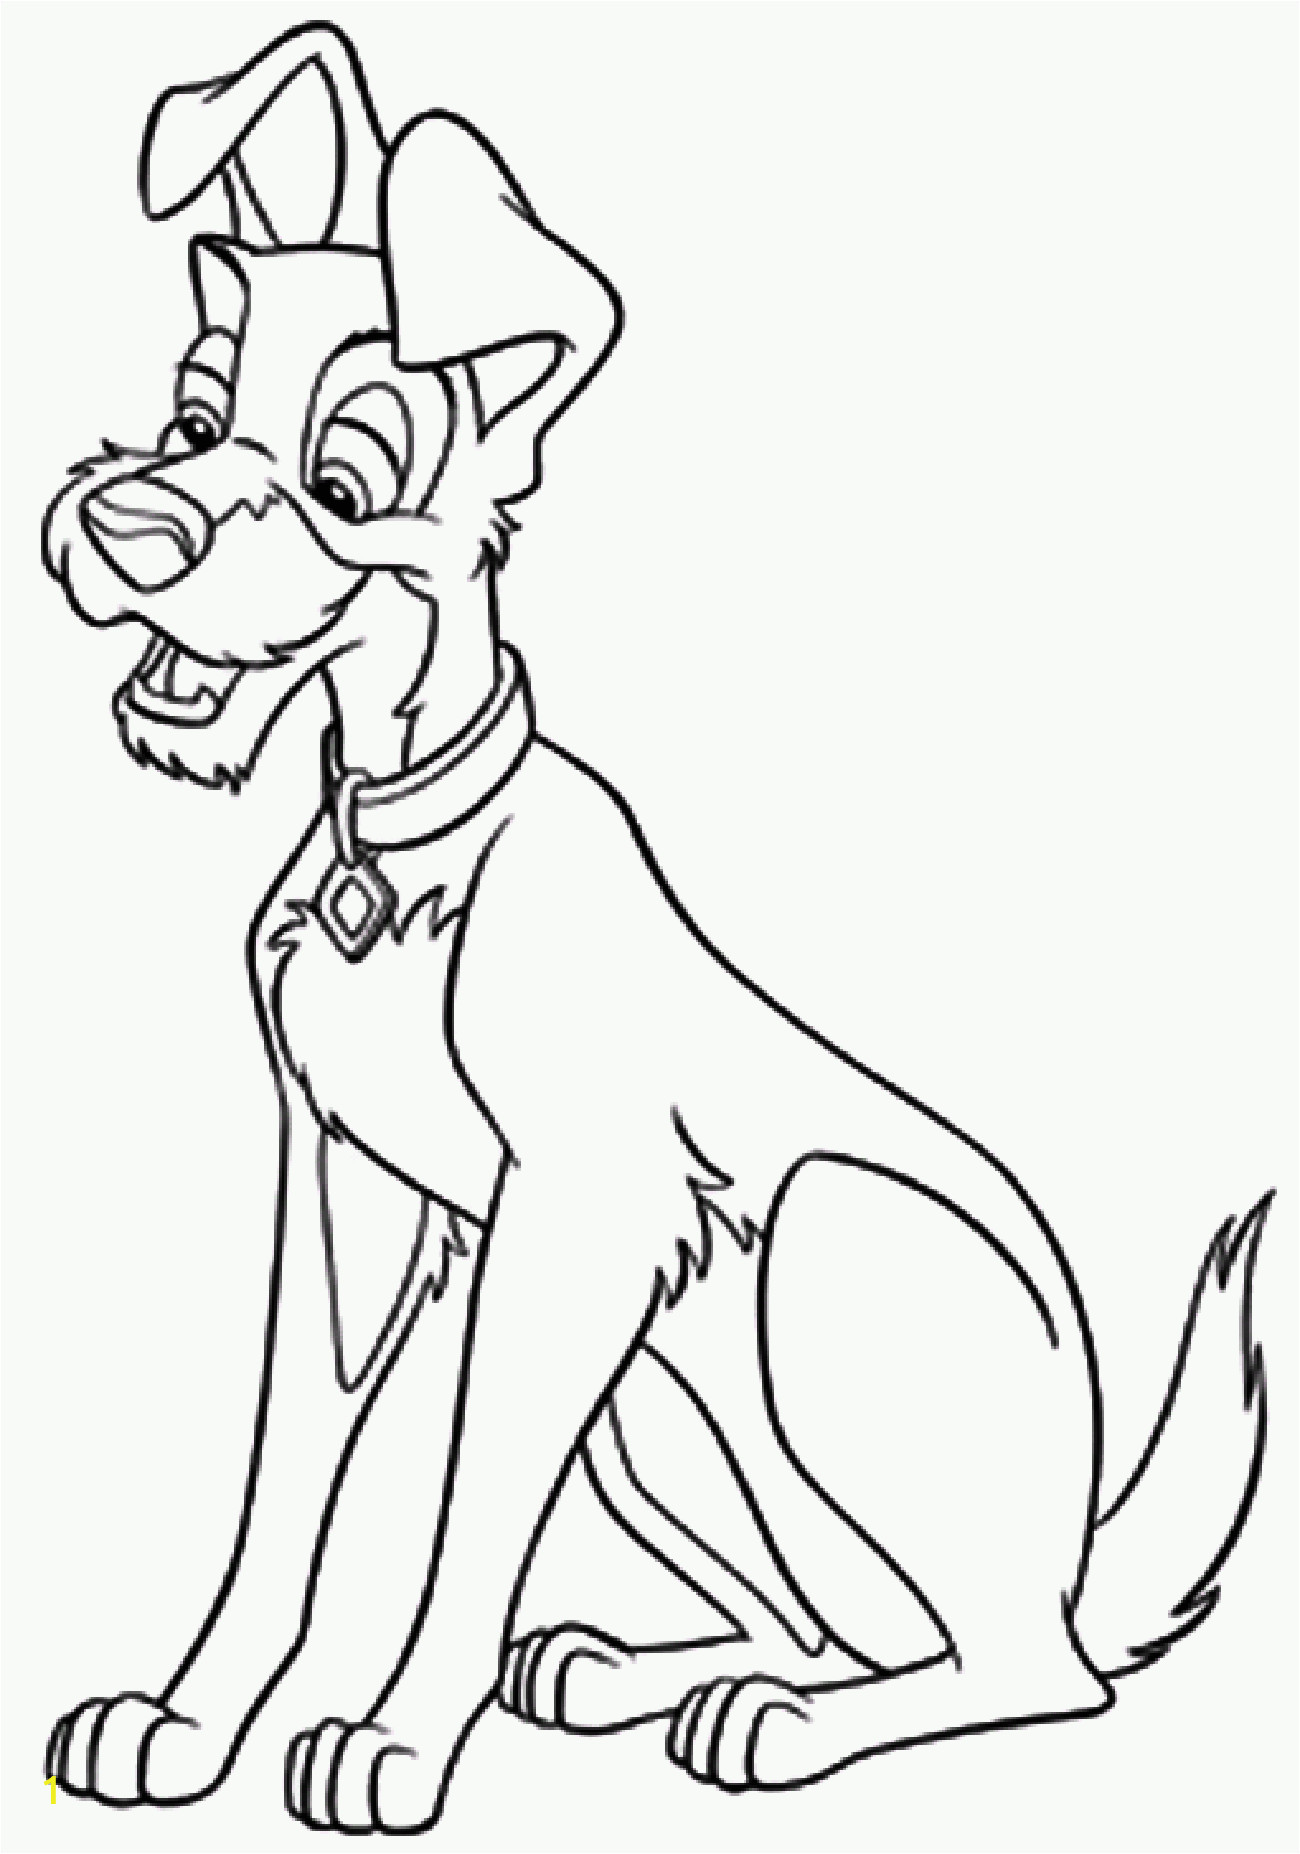 Lady and the Tramp Coloring Pages the Lady and the Tramp to Color for Children the Lady